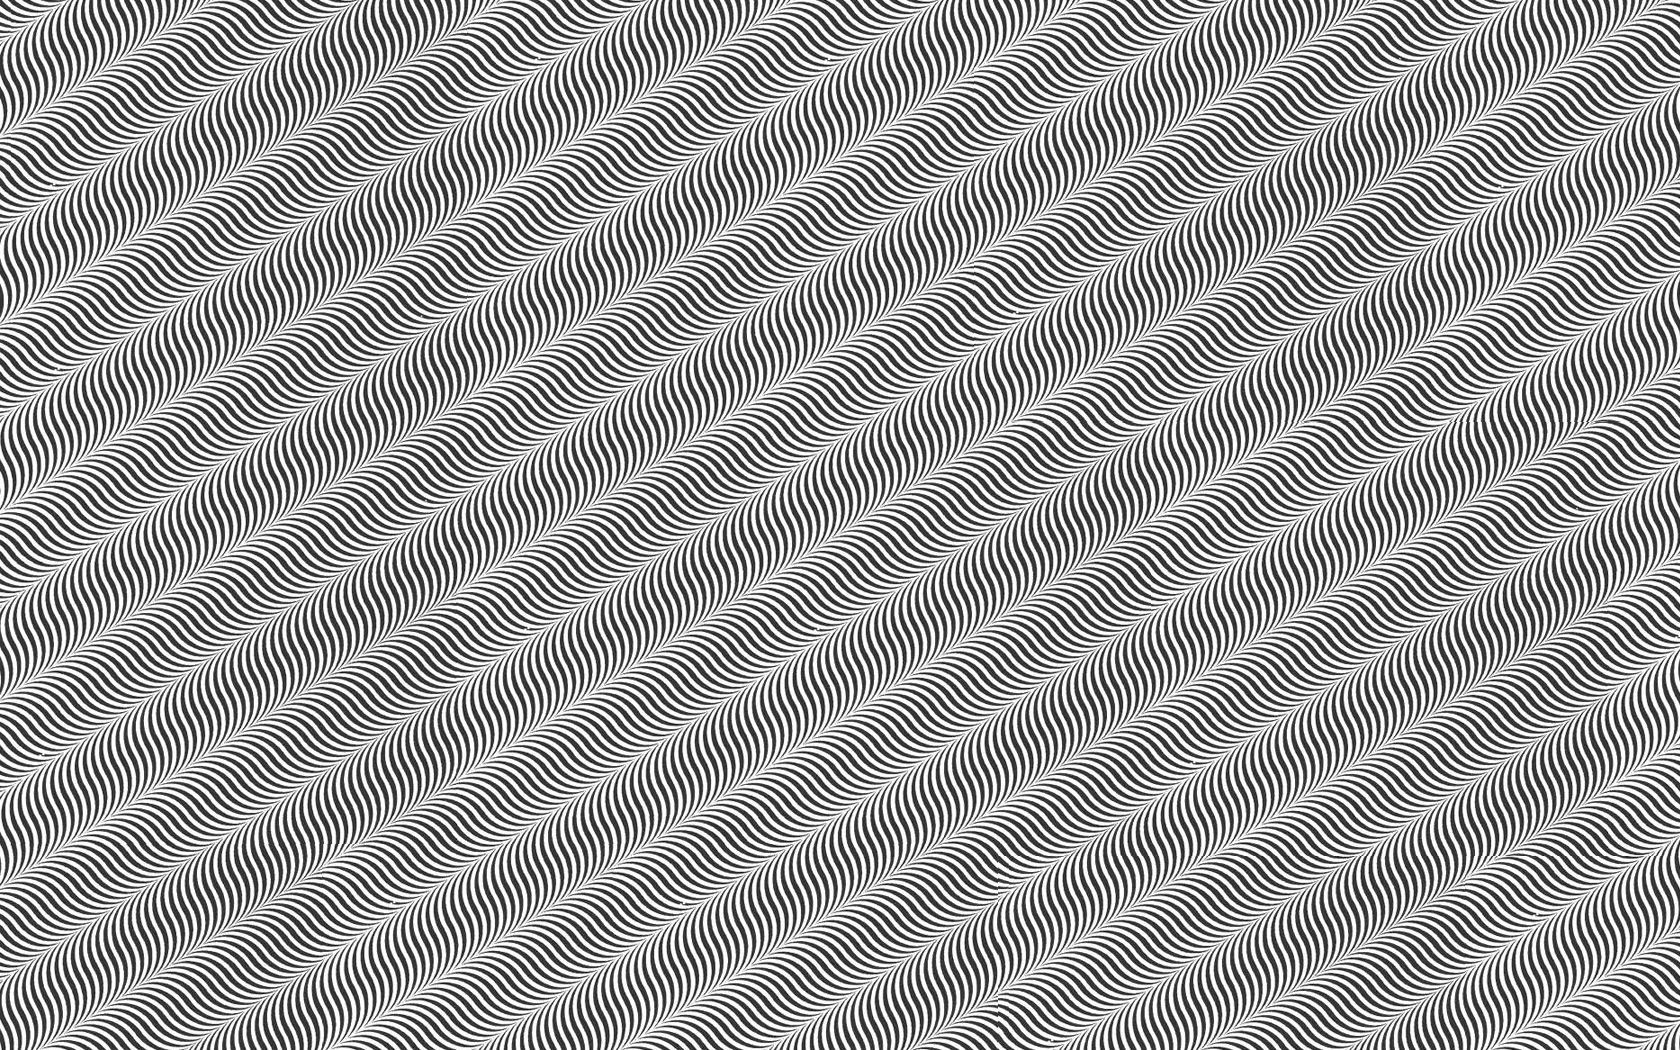 Black and White Optical Illusions Wallpaper, wallpaper, Black and ...